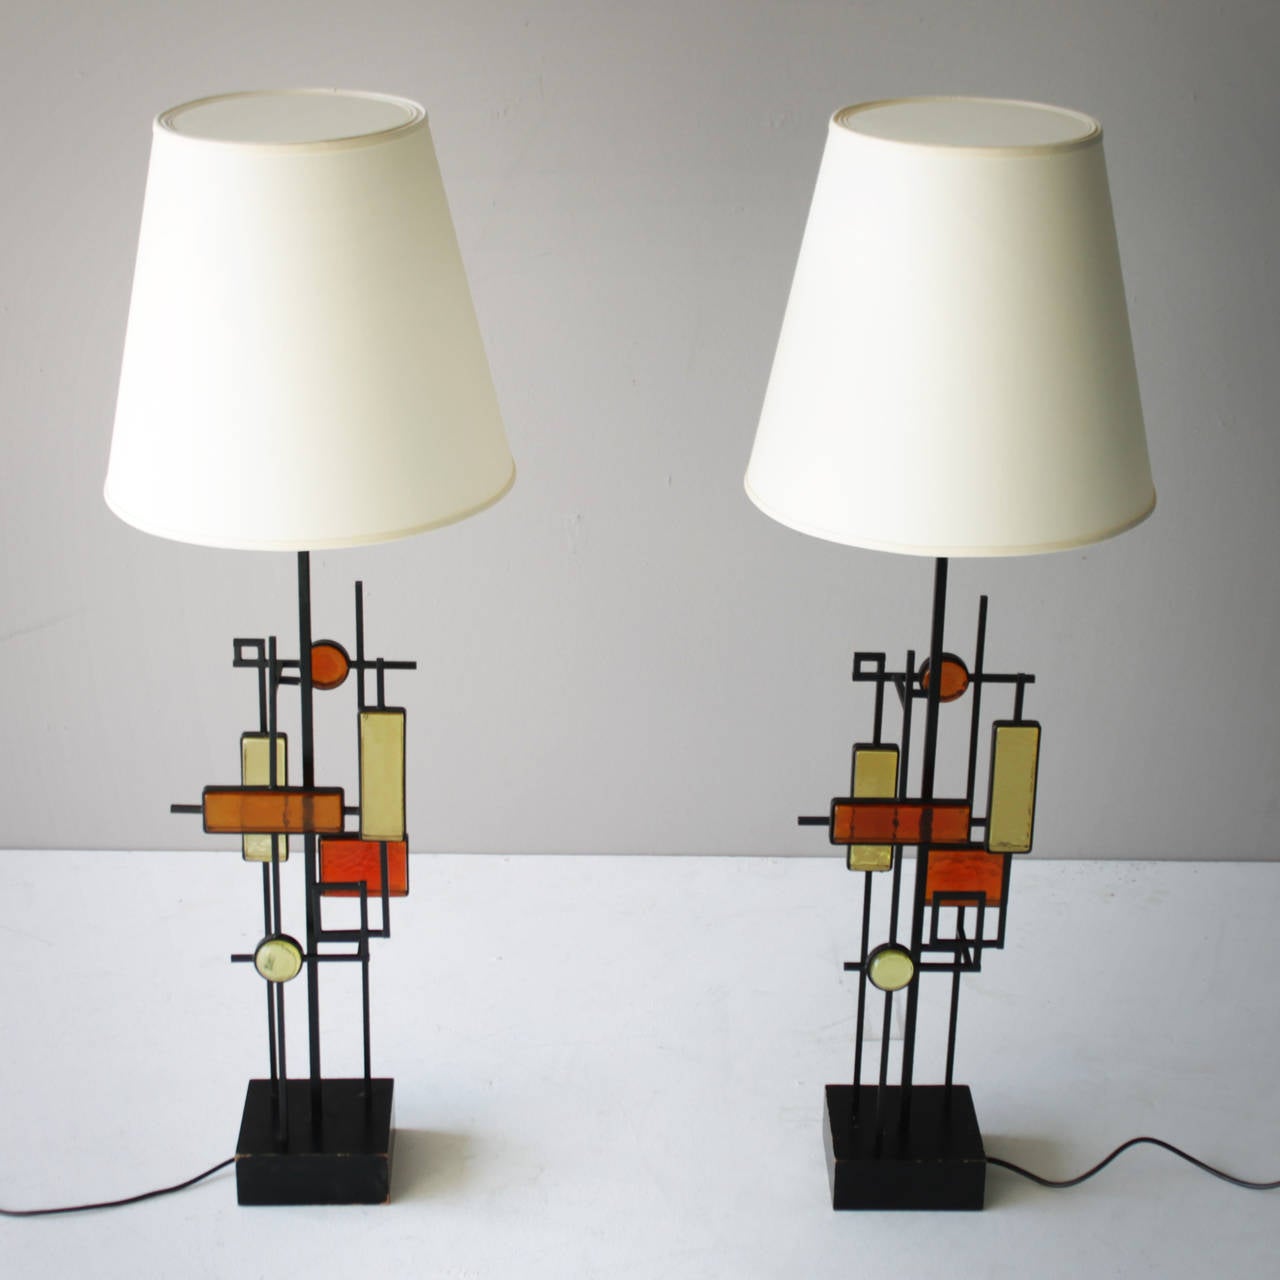 A pair of large glass geometric shaped lamps by Svend Aage Holm Sorensen for Holm Sorensen and Co. Made in Denmark. Marked. Shades have been renewed.
Measurements: Width: 8.2 in. (21 cm), height: 31.5 in. (80 cm), total height with shade: 39.3 in.